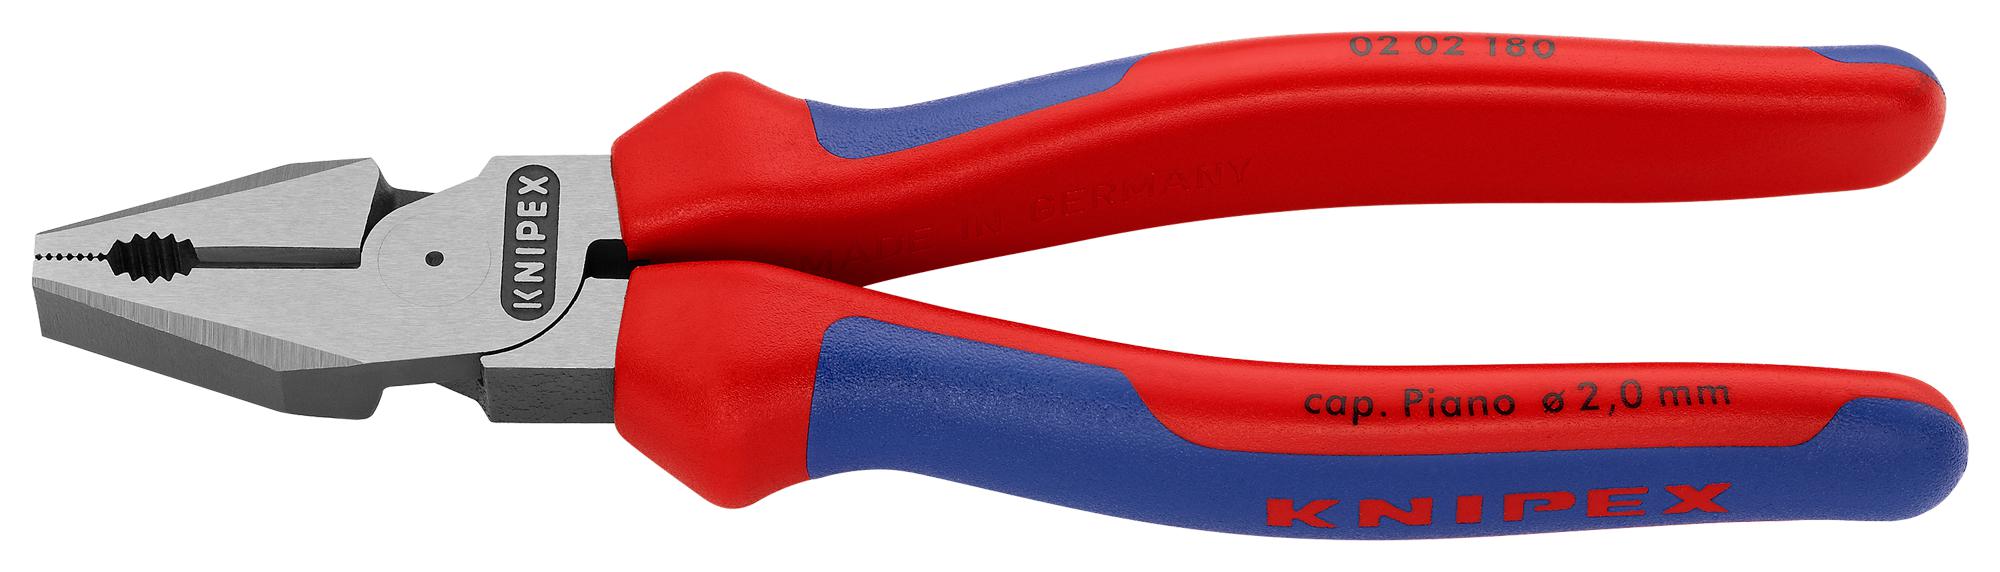 02 02 180 COMBINATION PLIER, 180MM KNIPEX